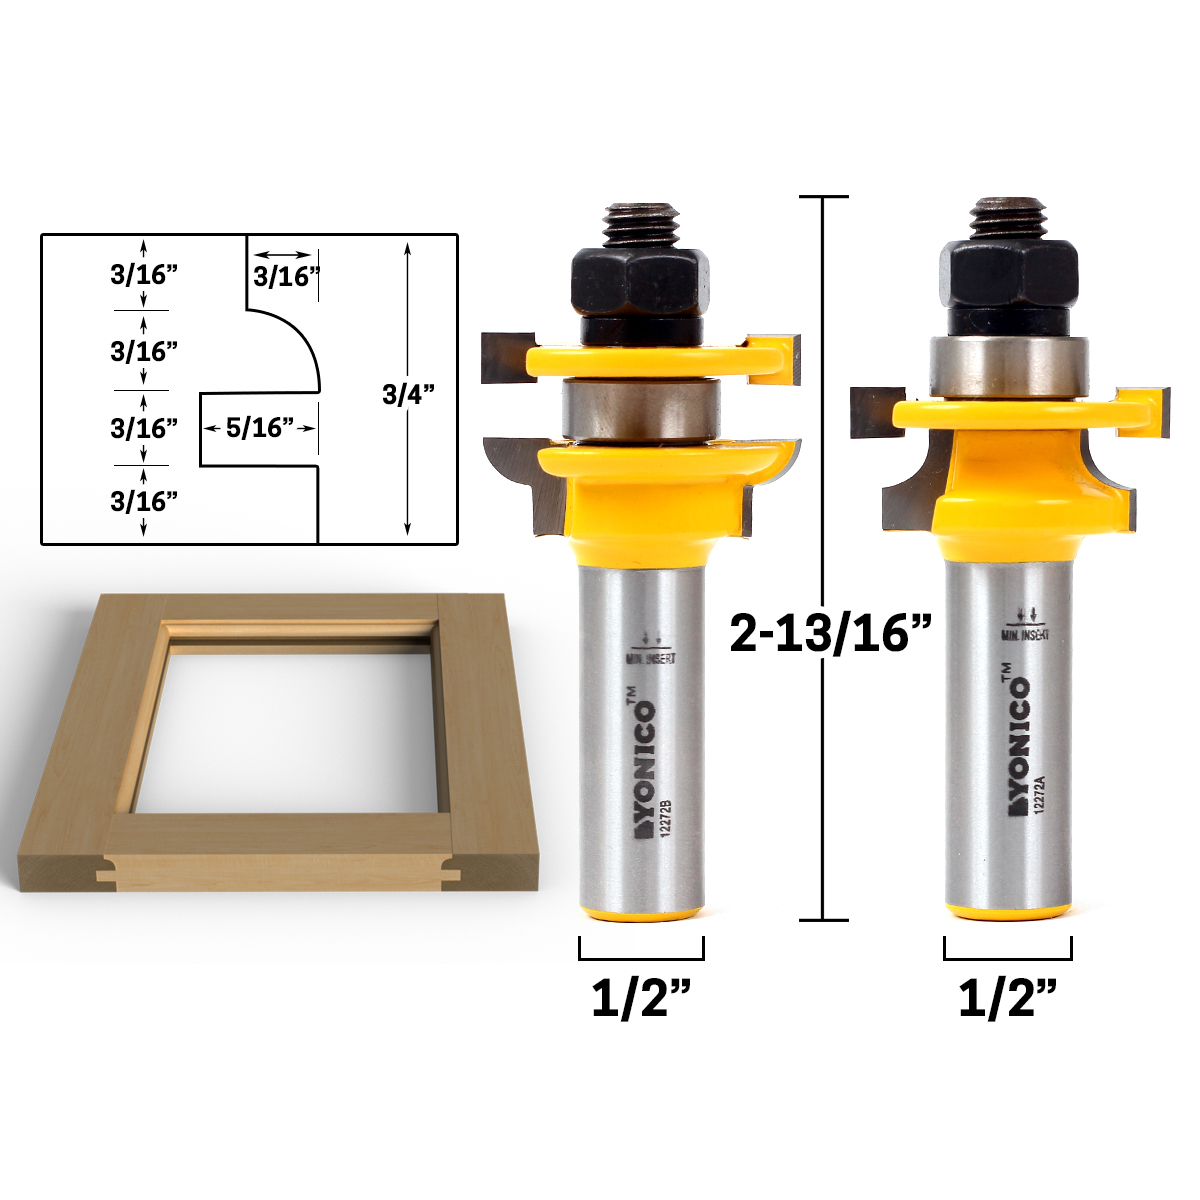 Yonico 12120 Classical Ogee Stacked Rail and Stile Router Bit 1/2" Shank 